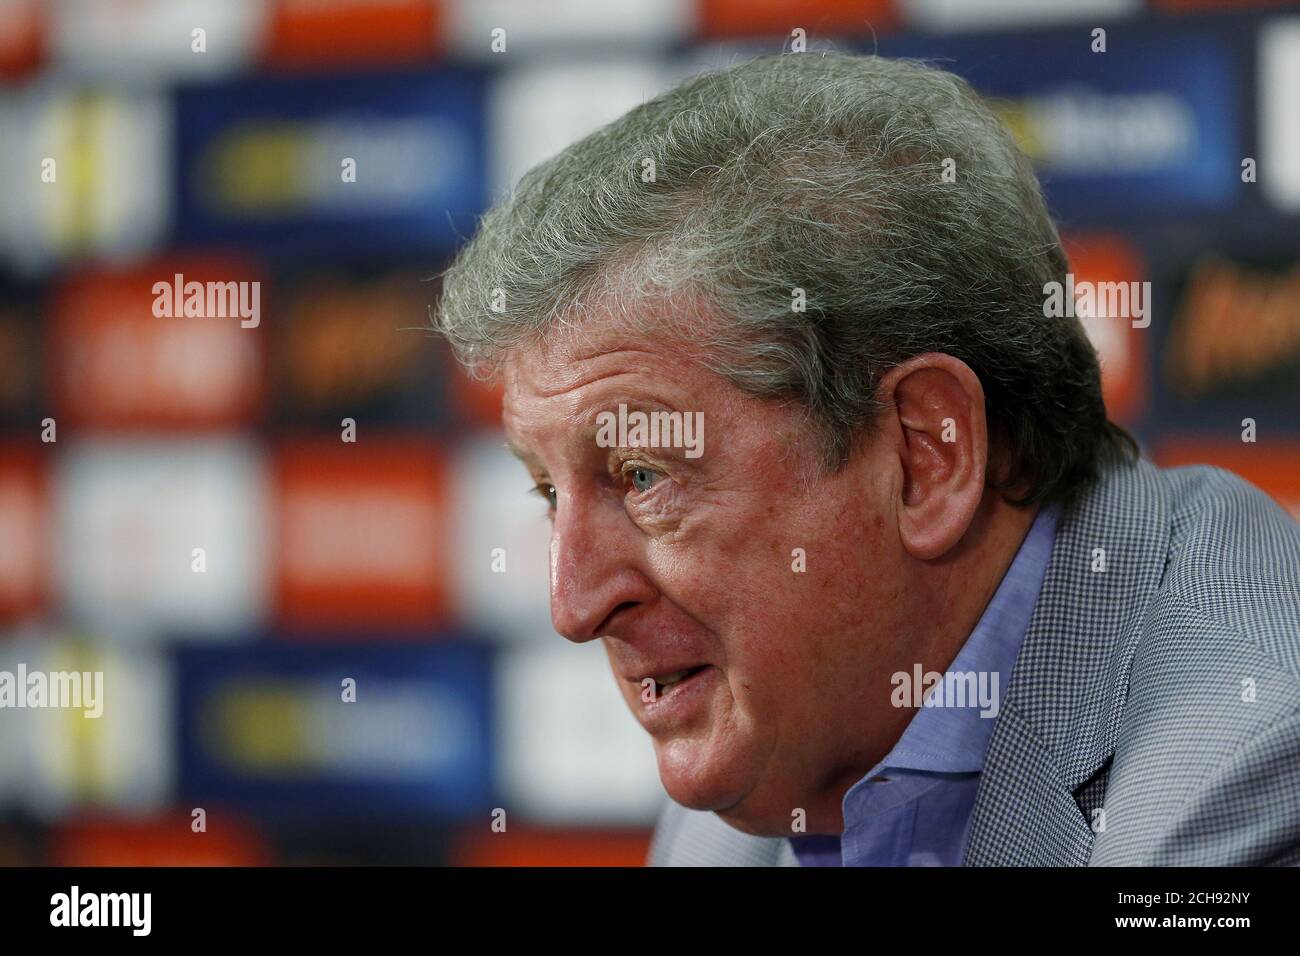 England manager Roy Hodgson during the squad announcement at Wembley Stadium, London. PRESS ASSOCIATION Photo. Picture date: Monday May 16, 2016. See PA story SOCCER England. Photo credit should read: Steven Paston/PA Wire. Stock Photo